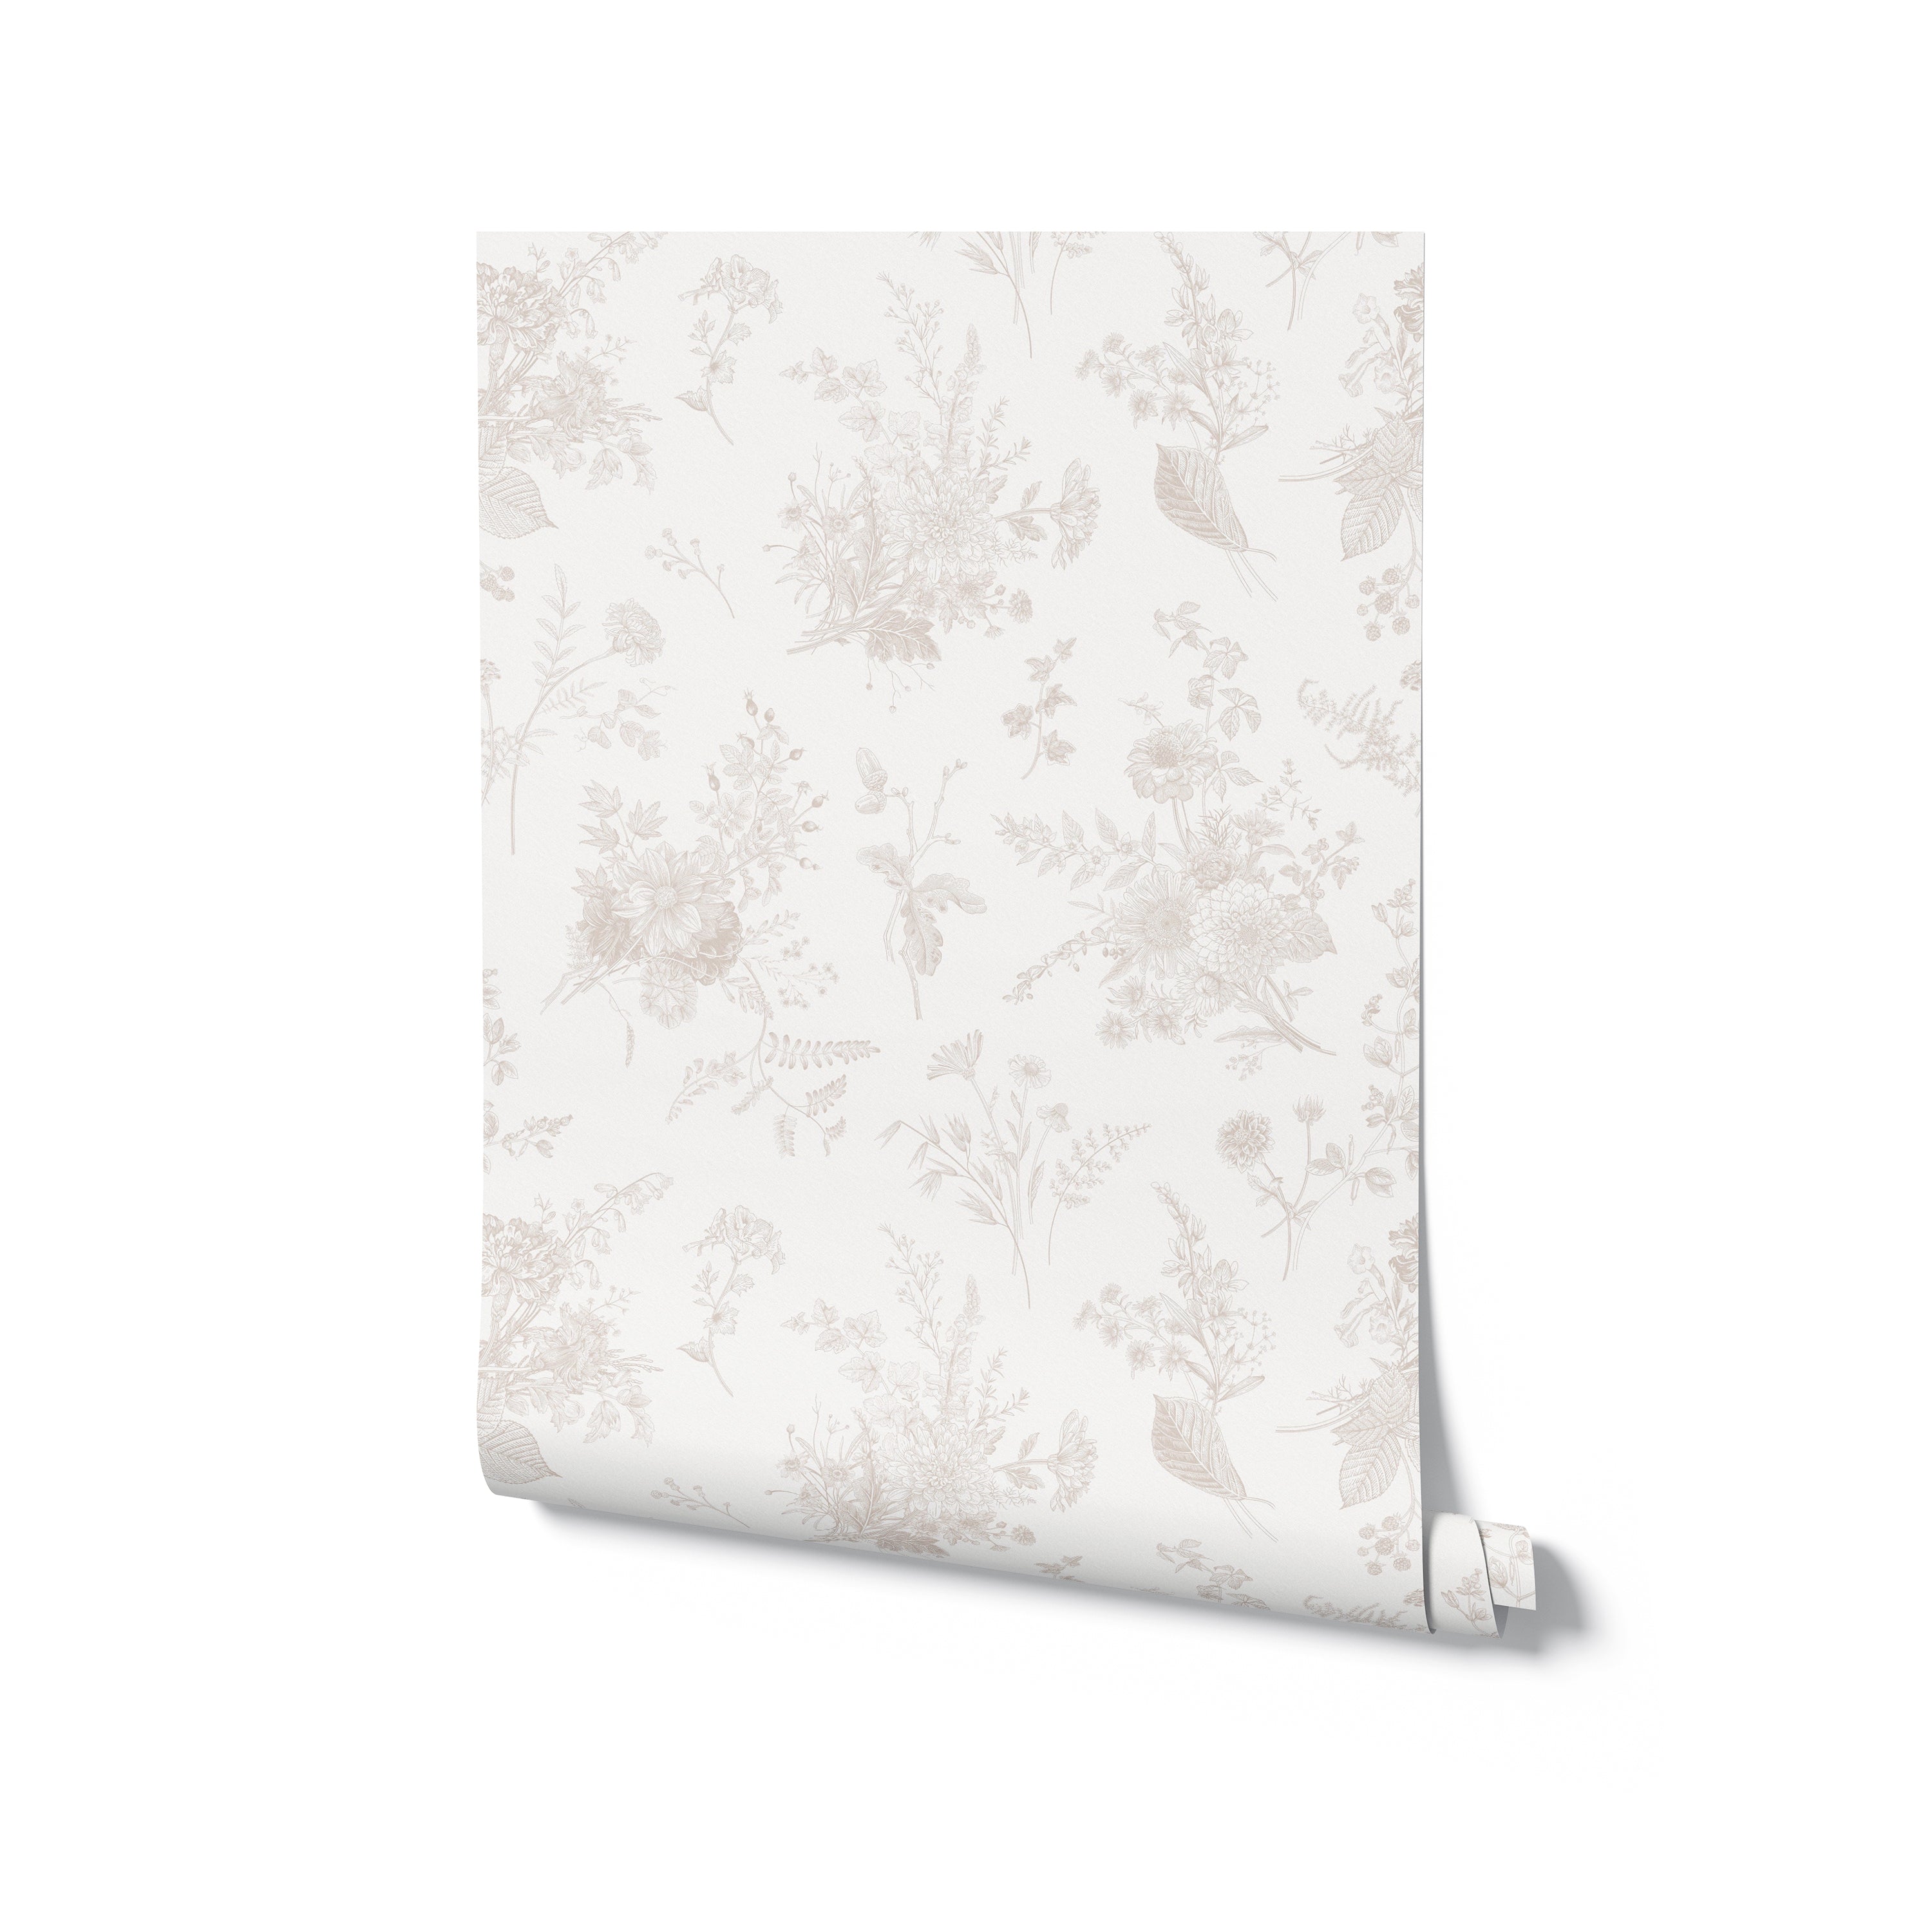 An image of the rolled Jouyful Garden Wallpaper, showing off the delicate botanical patterns that cover its surface. The soft beige illustrations on the off-white background offer a look that is both subtle and intricate, promising to imbue any room with a sense of calm and sophistication. The roll suggests the wallpaper's ability to blend seamlessly into a variety of decor styles while maintaining its distinct elegance.